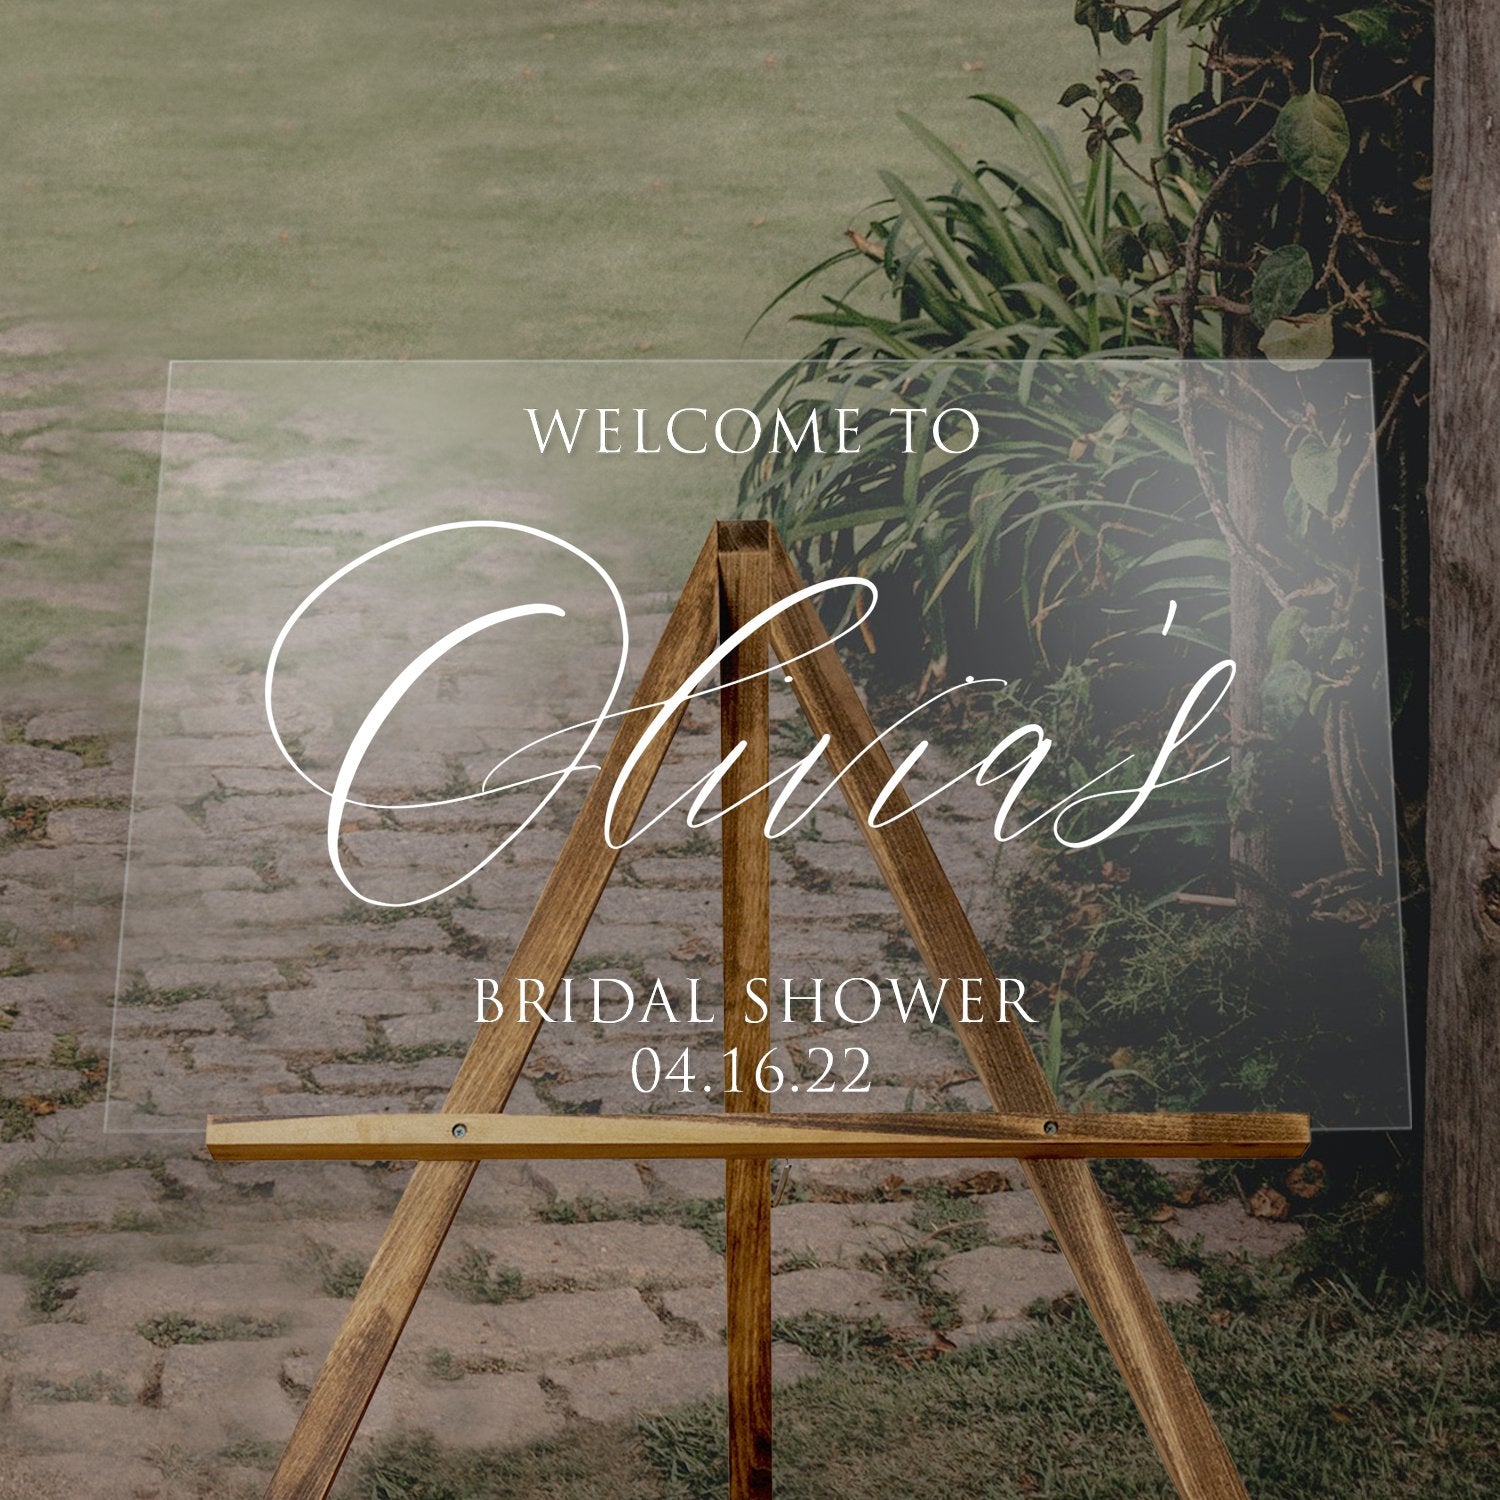 Charm guests with our Acrylic Bridal Shower Welcome Sign – a stylish and personalized touch for an unforgettable celebration.